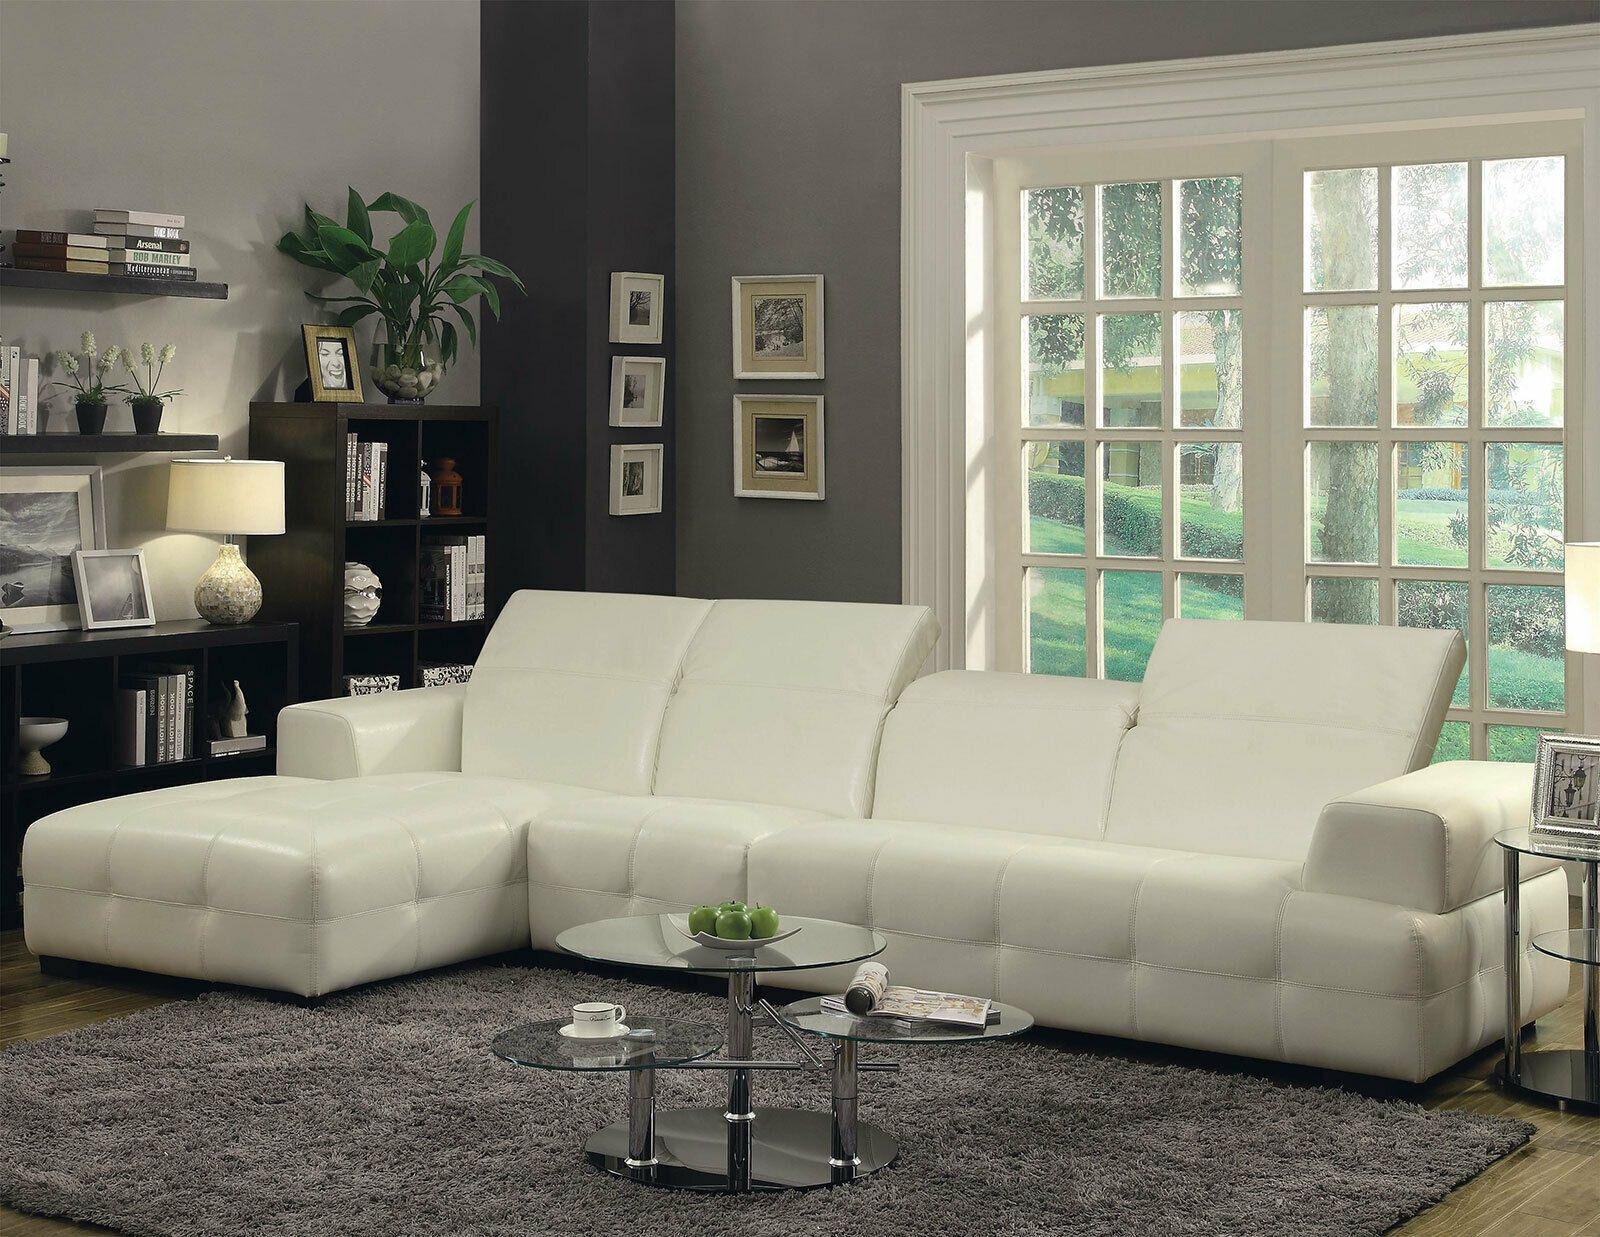 Amara Contemporary Sectional Living Room Furniture White Faux Leather Within Faux Leather Sectional Sofa Sets (View 15 of 21)